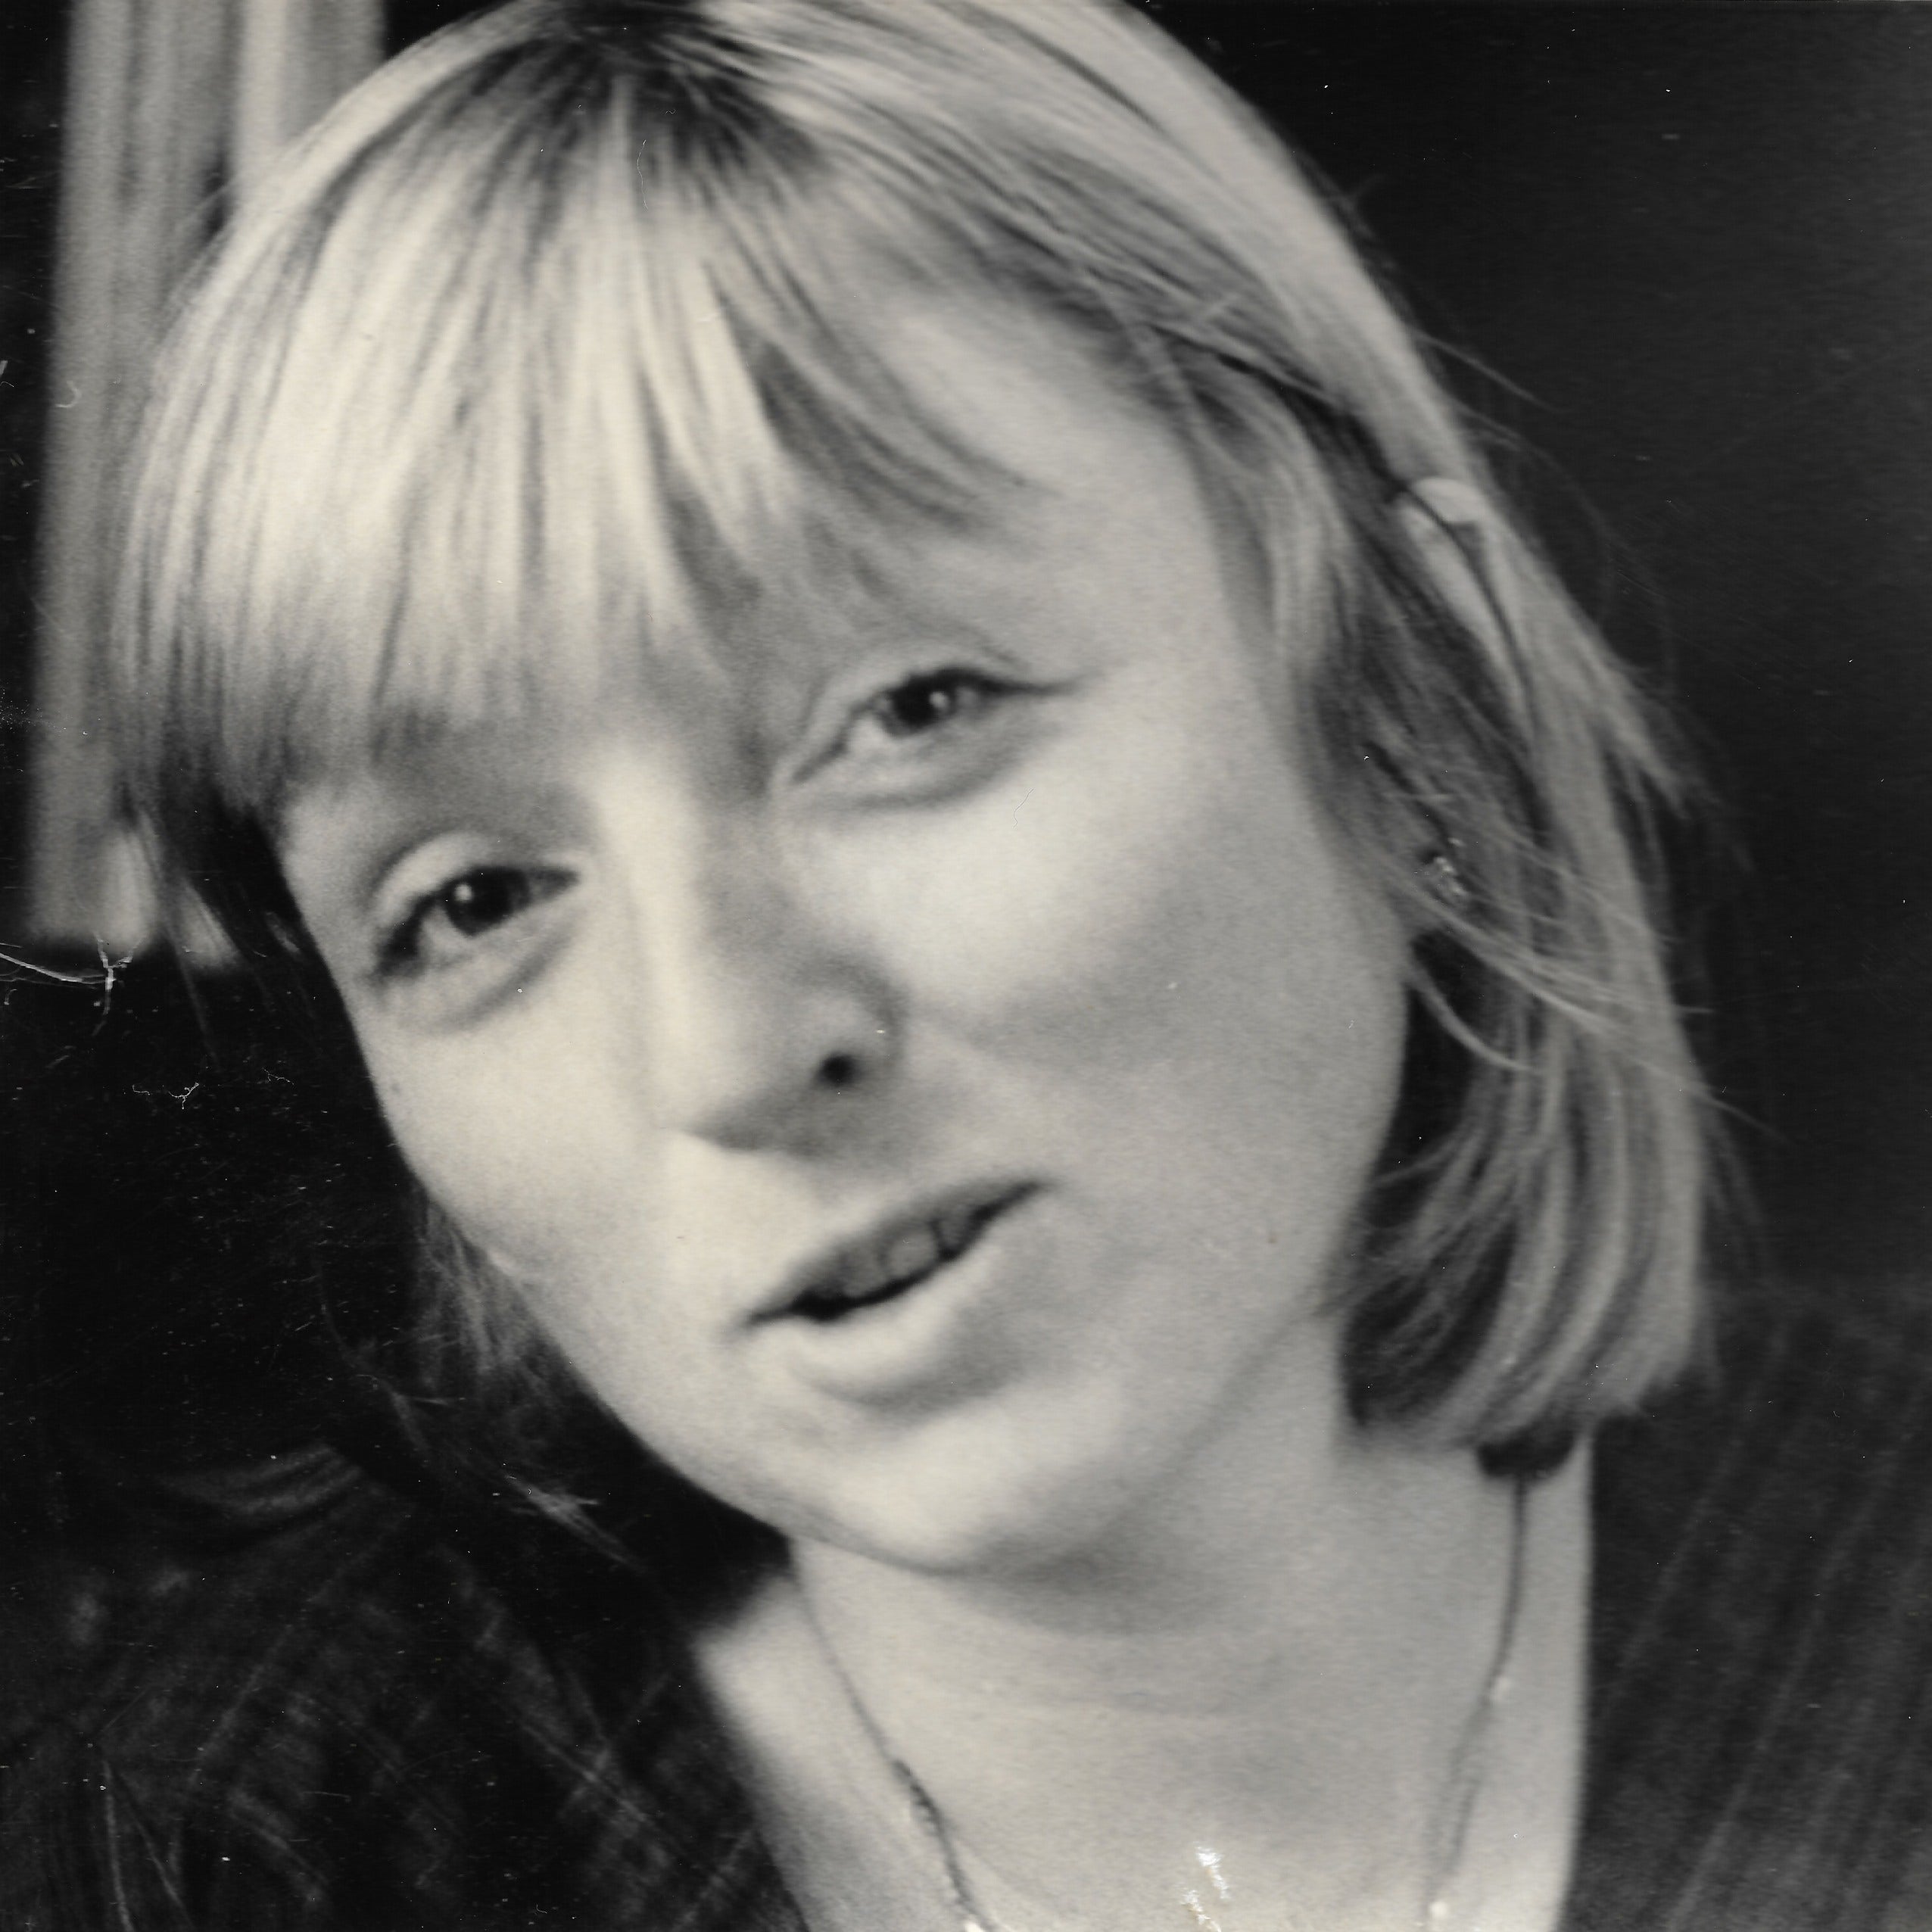 Author's headshot when she first moved to New York